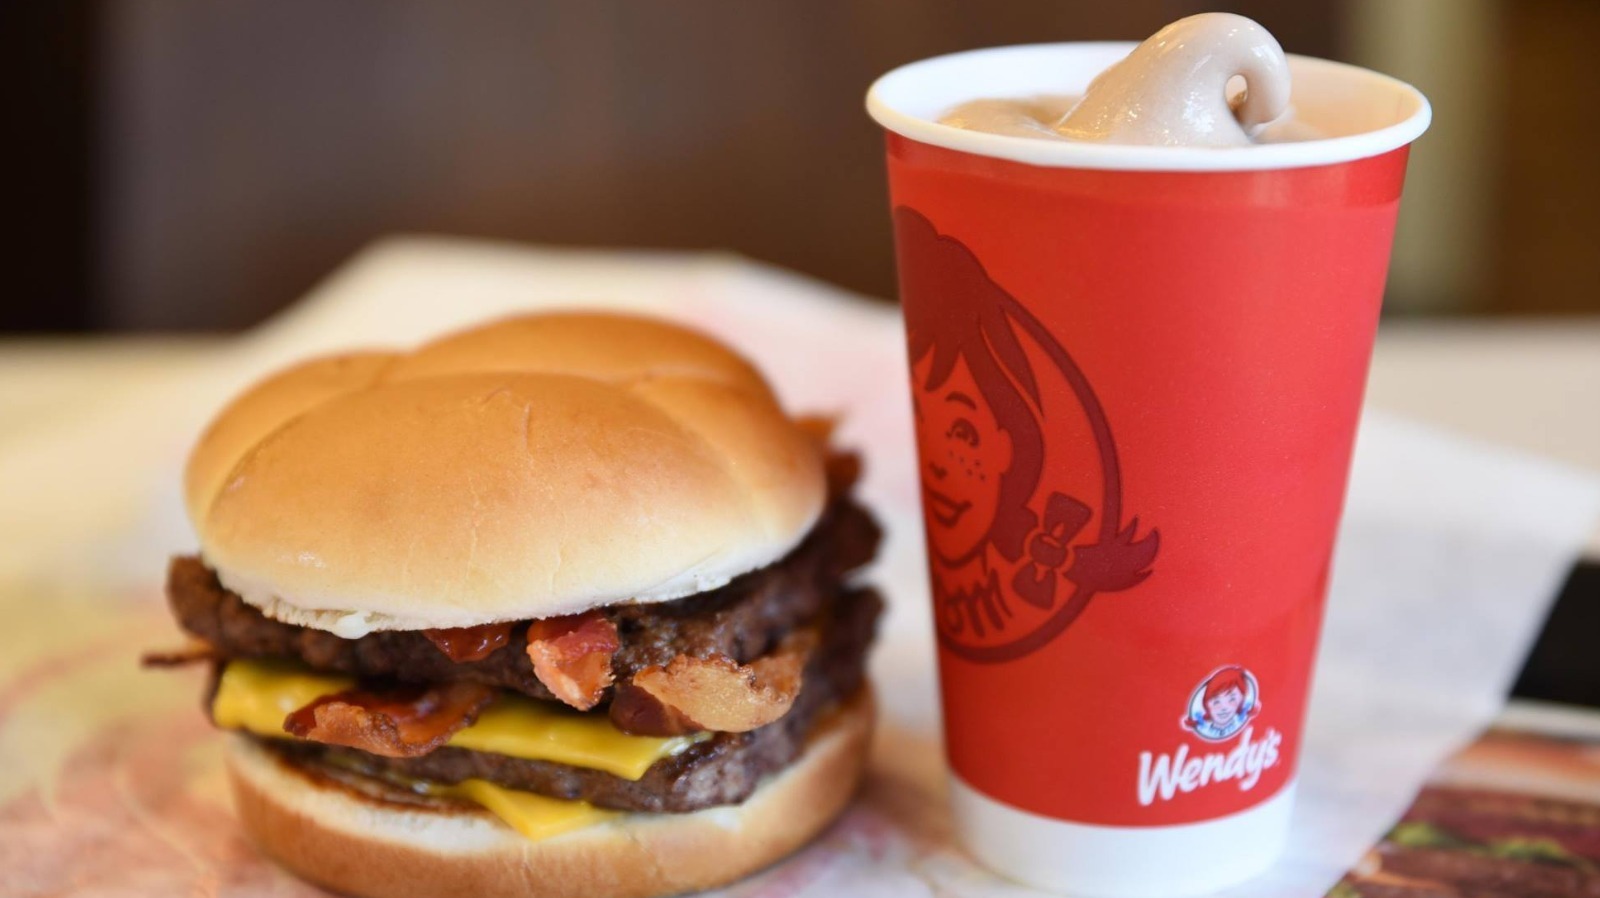 A New Frosty Flavor Has Arrived At Wendy's, But There's A Catch